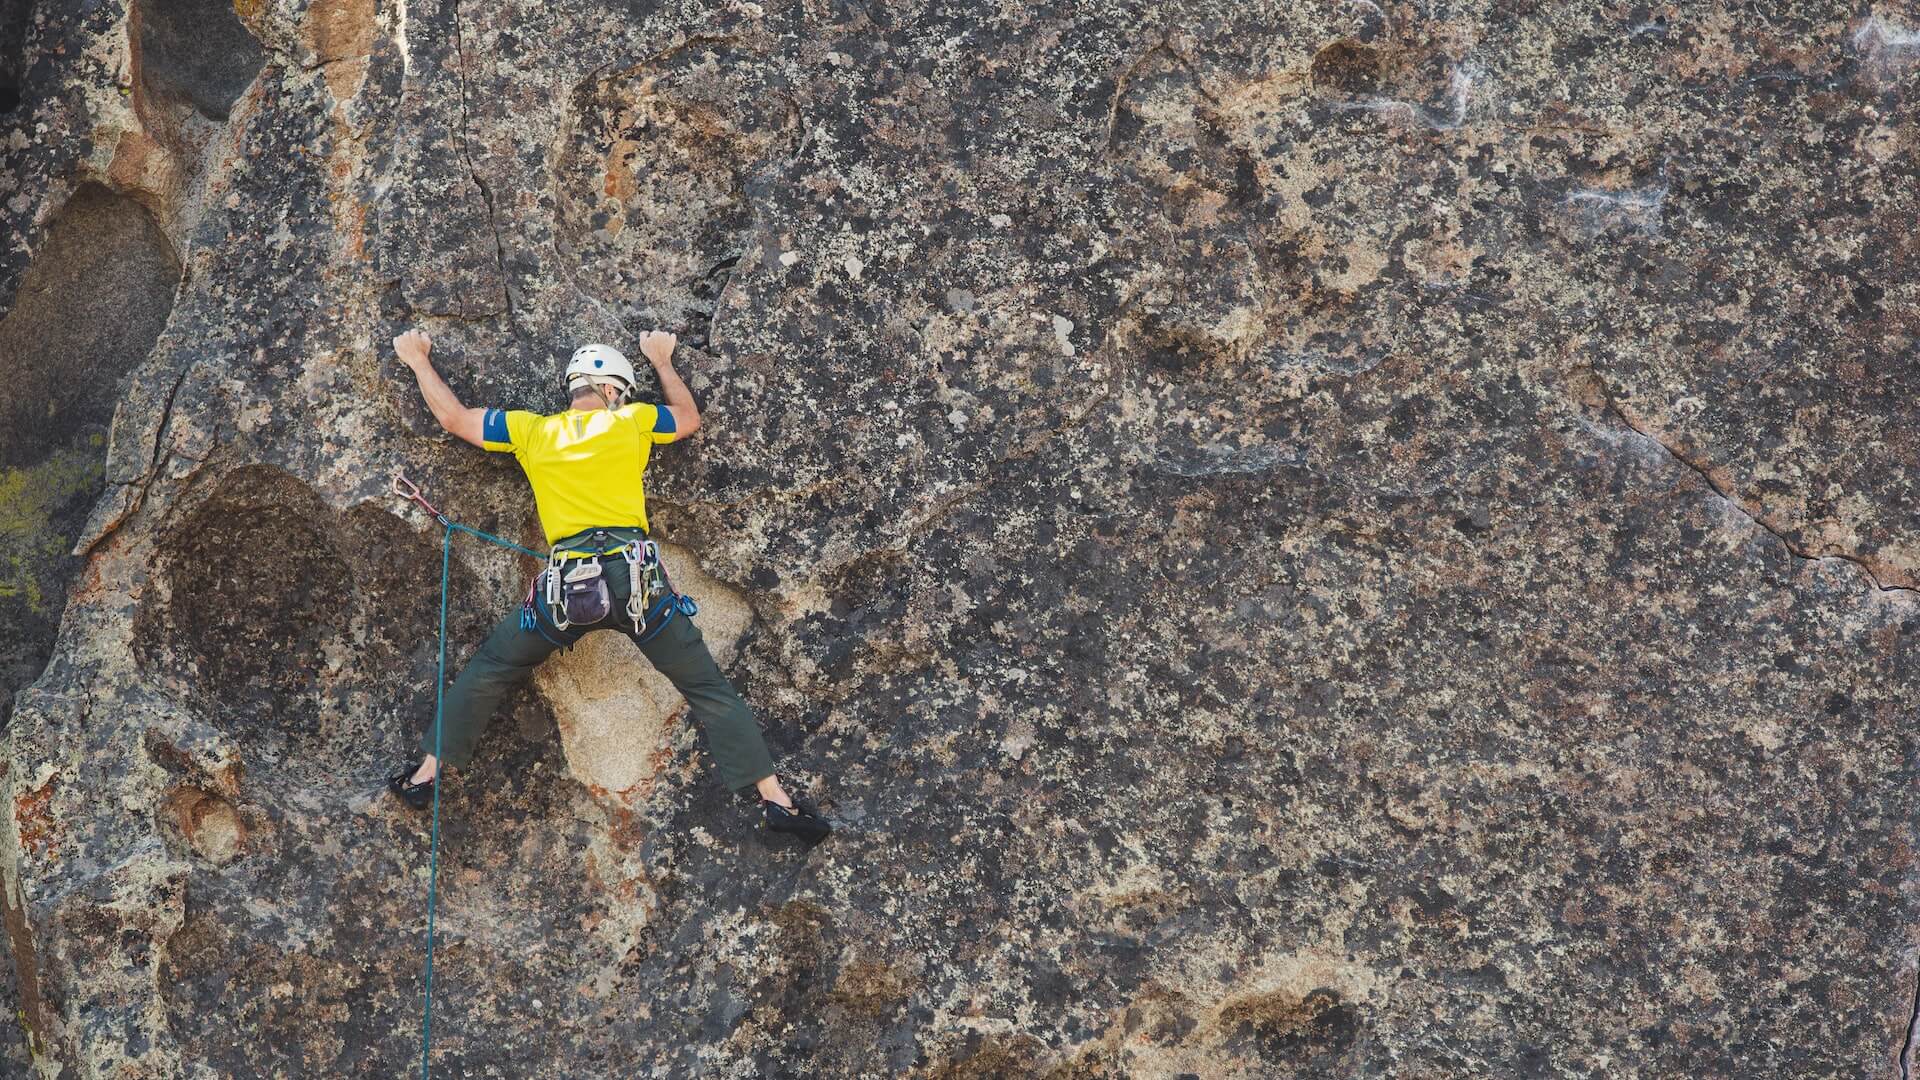 The Thrill And Challenges Of Rock Climbing